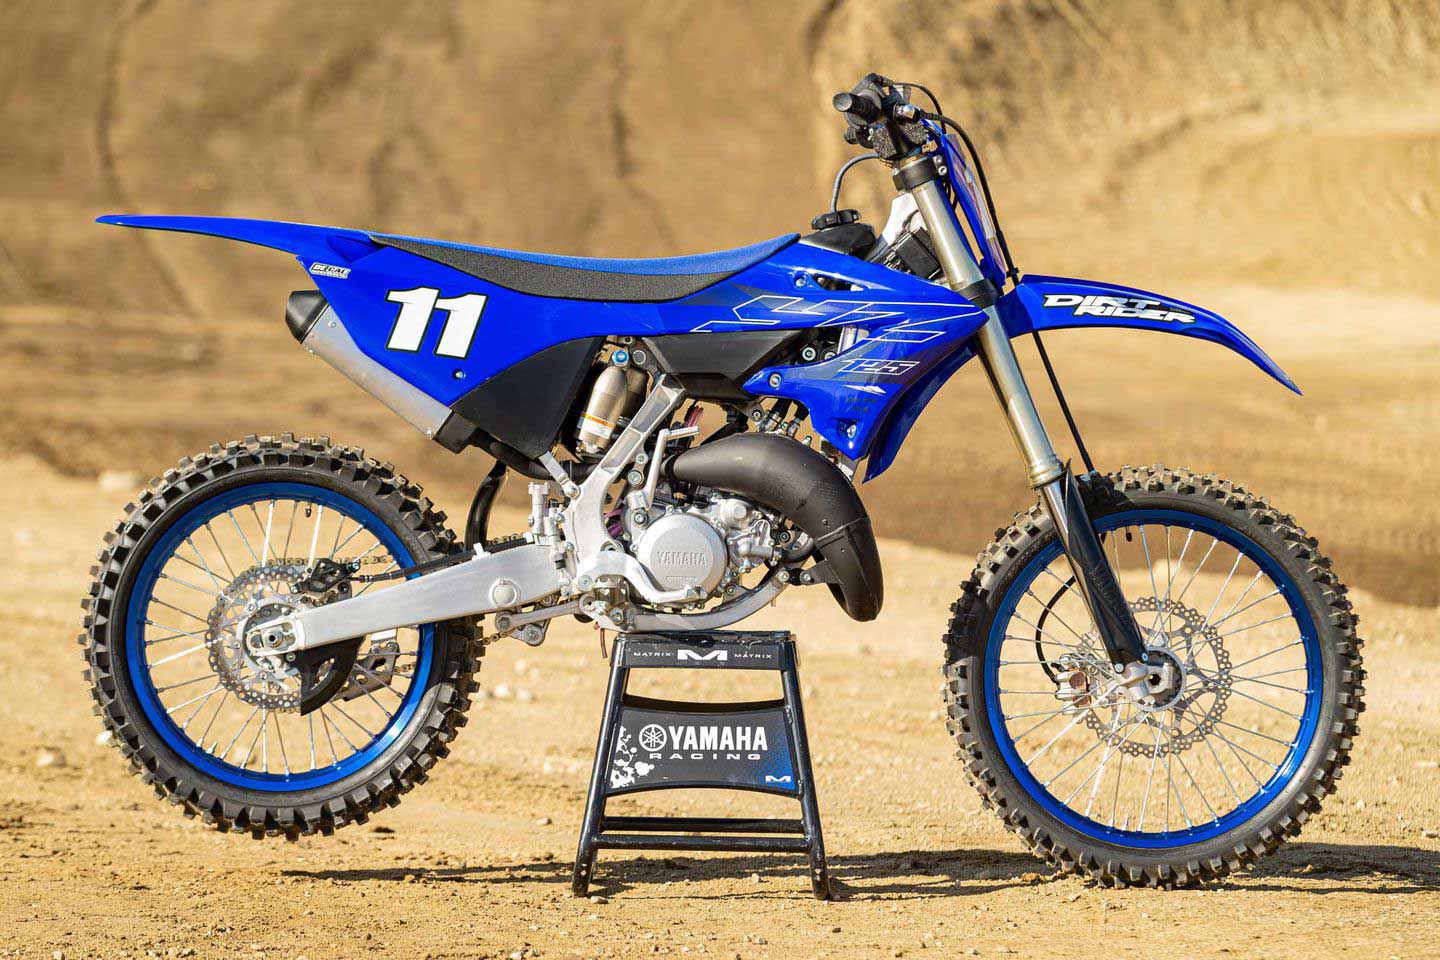 The 2022 YZ125’s silencer is 2 inches shorter and features a 6mm-longer outlet ring, while the expansion chamber has a narrower profile.